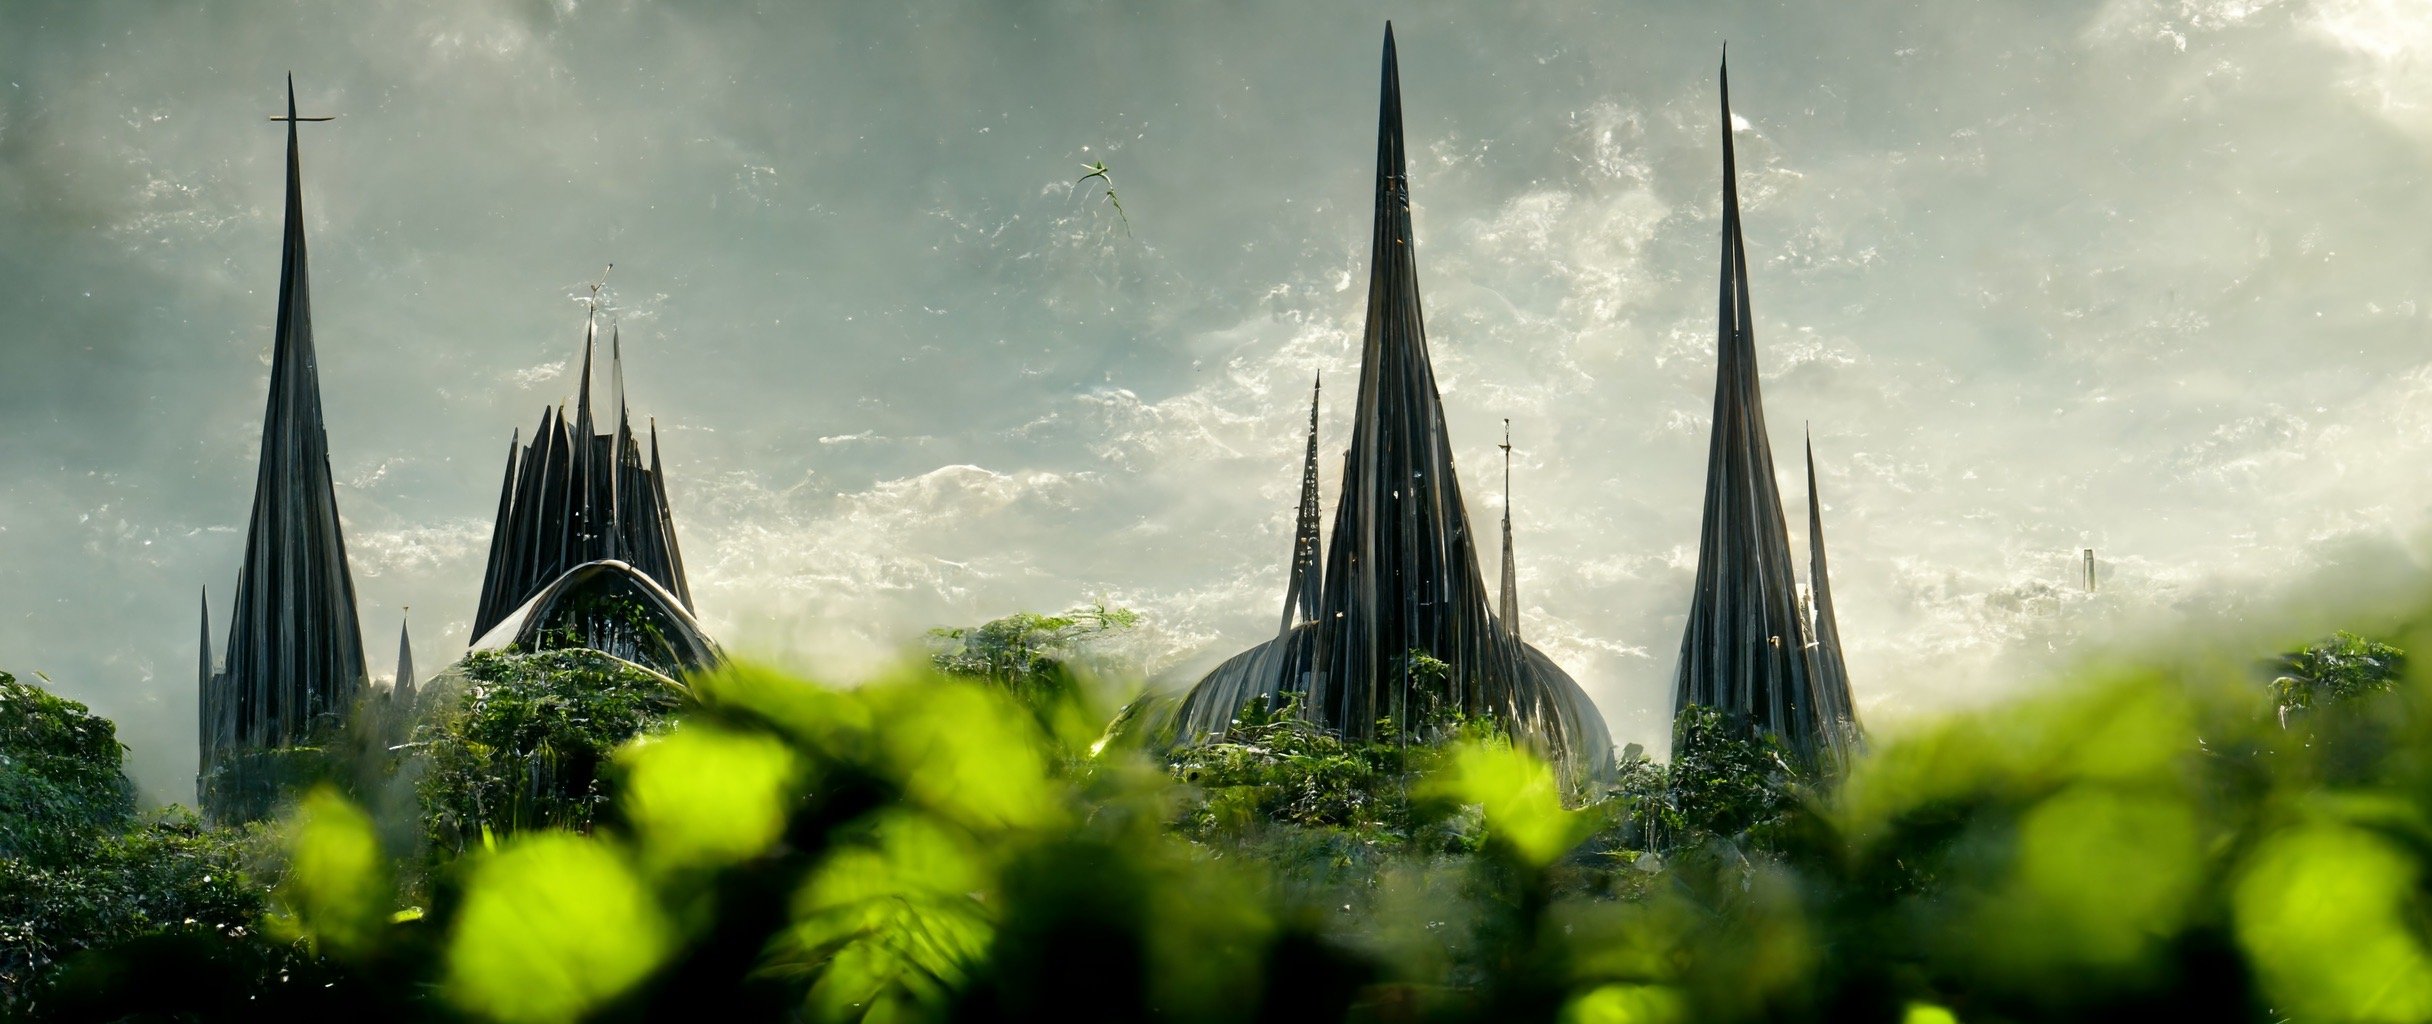 722c1ea3-46b6-44e5-84e0-ed1cf7918455_S3RAPH_epic_futuristic_cathedral._Filled_with_lush_plant_life._cinematic_composition_8k_render_w_2048_h_858.JPG